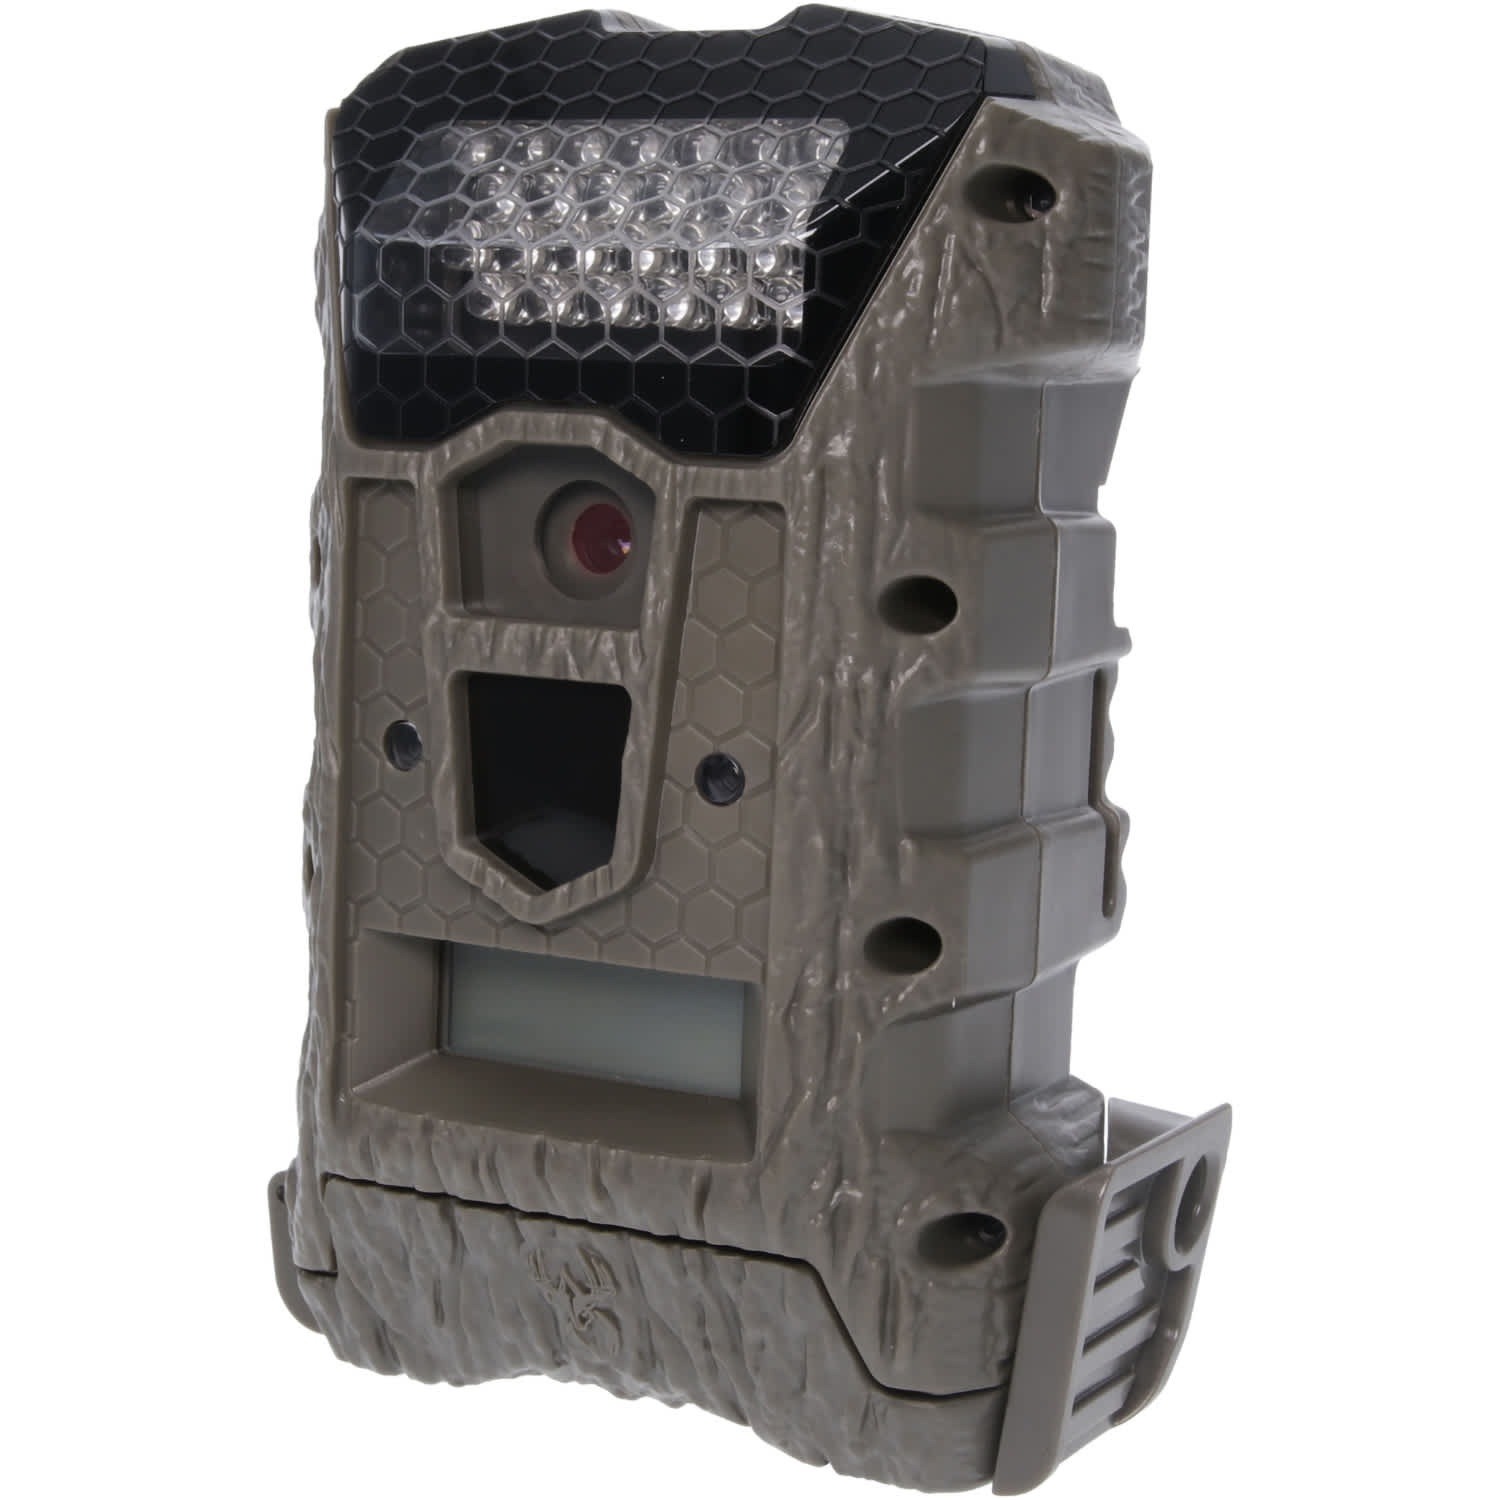 Wildgame Innovations™ Wraith™ 18 Trail Camera